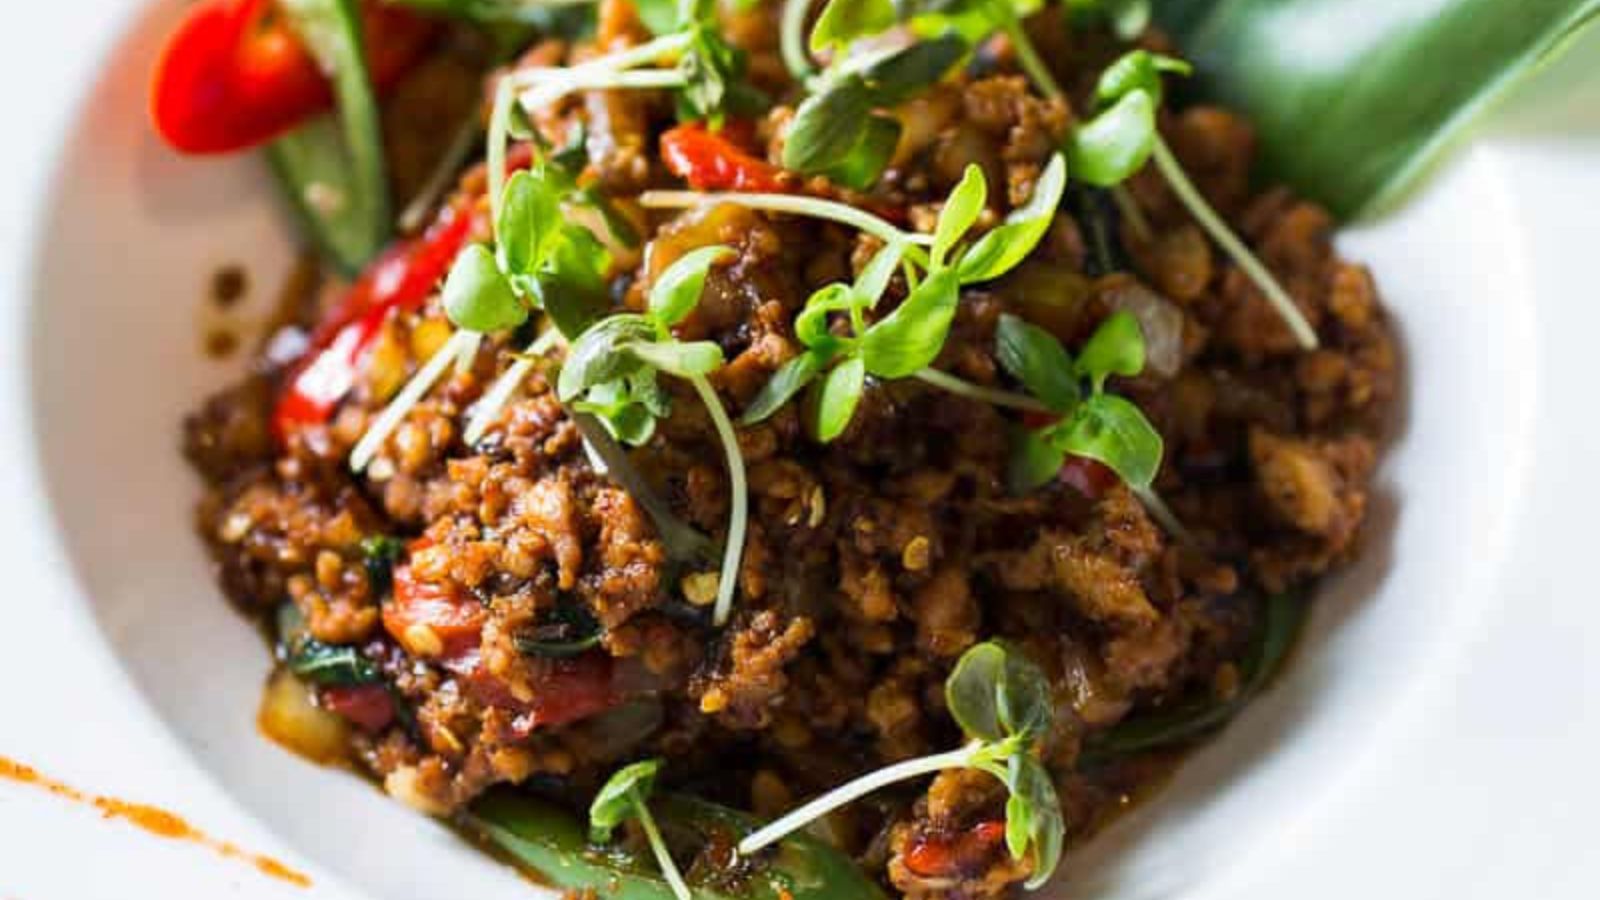 <p>With its classic Thai flavours, the Pad Ka Pow Gai is in short, a Thai basil chicken recipe. I don’t suspect many of you speak Thai. I for sure don’t. Anyways, in its original form, it’s quite spicy.</p><p><strong>Recipe: <a href="https://www.greedygourmet.com/recipes-for-diets/gluten-free/pad-ka-pow-gai/">pad ka pow</a></strong></p>